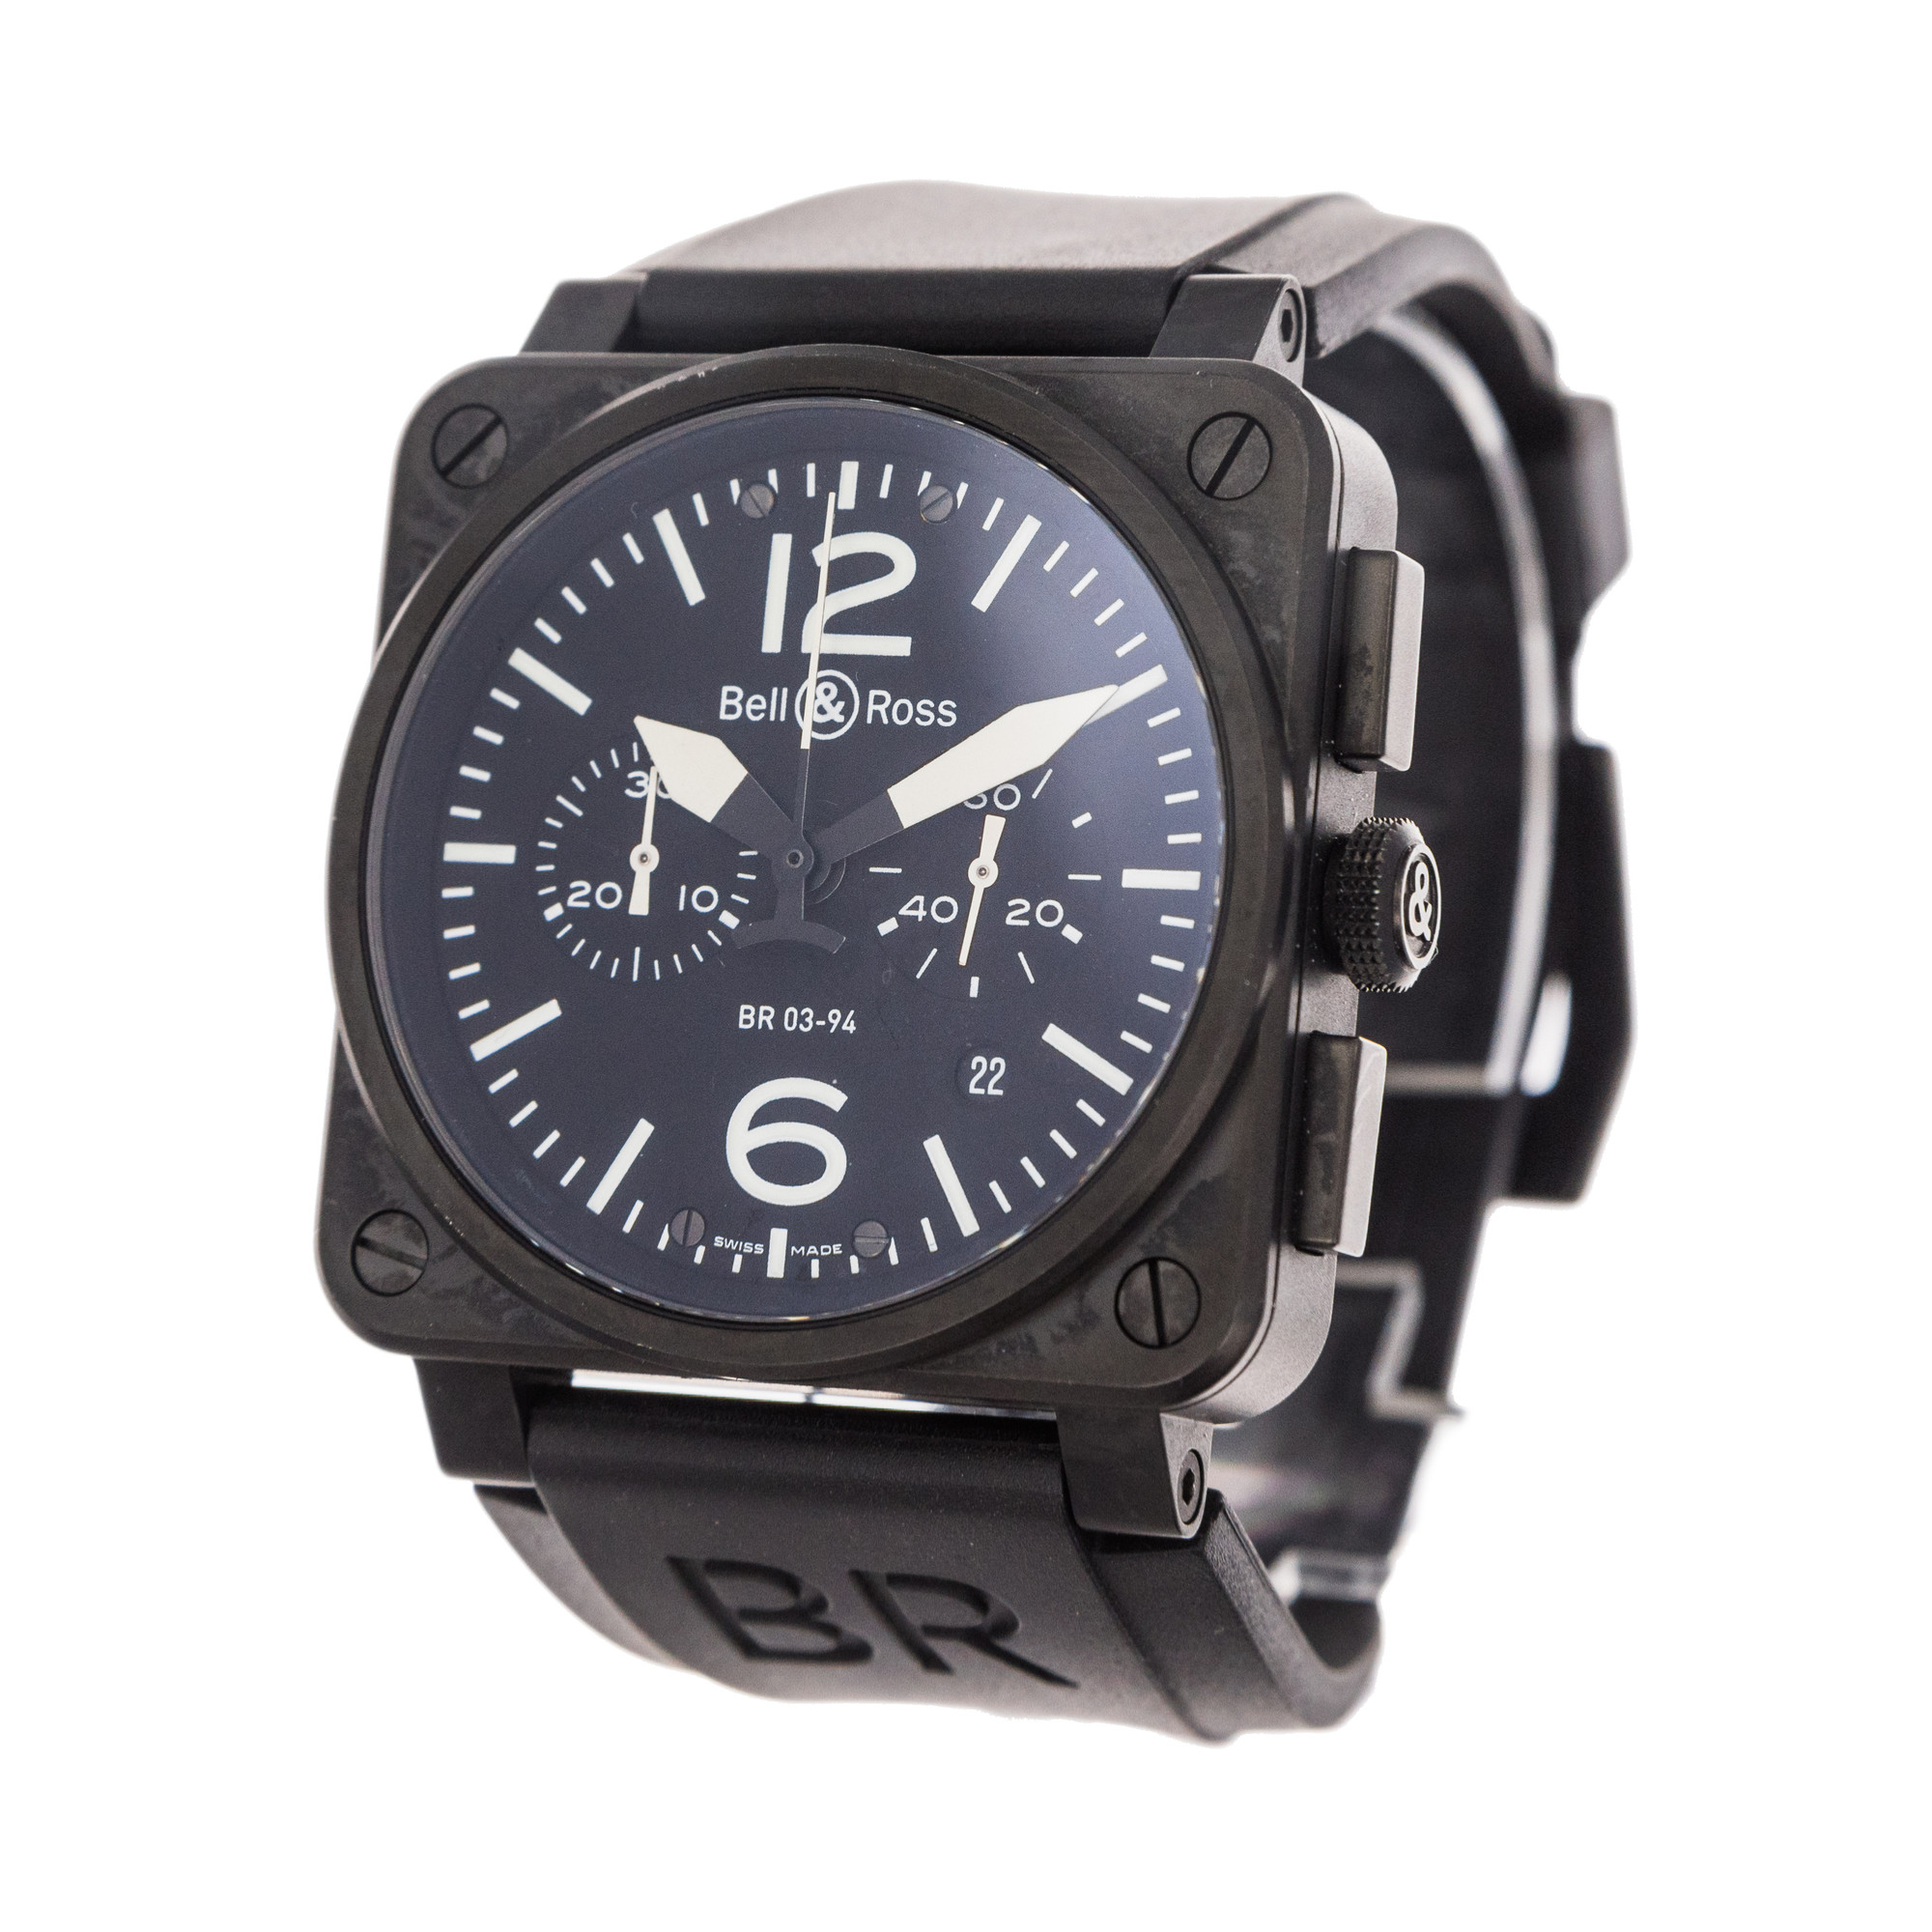 Bell & Ross BR03-94 PVD Chronograph